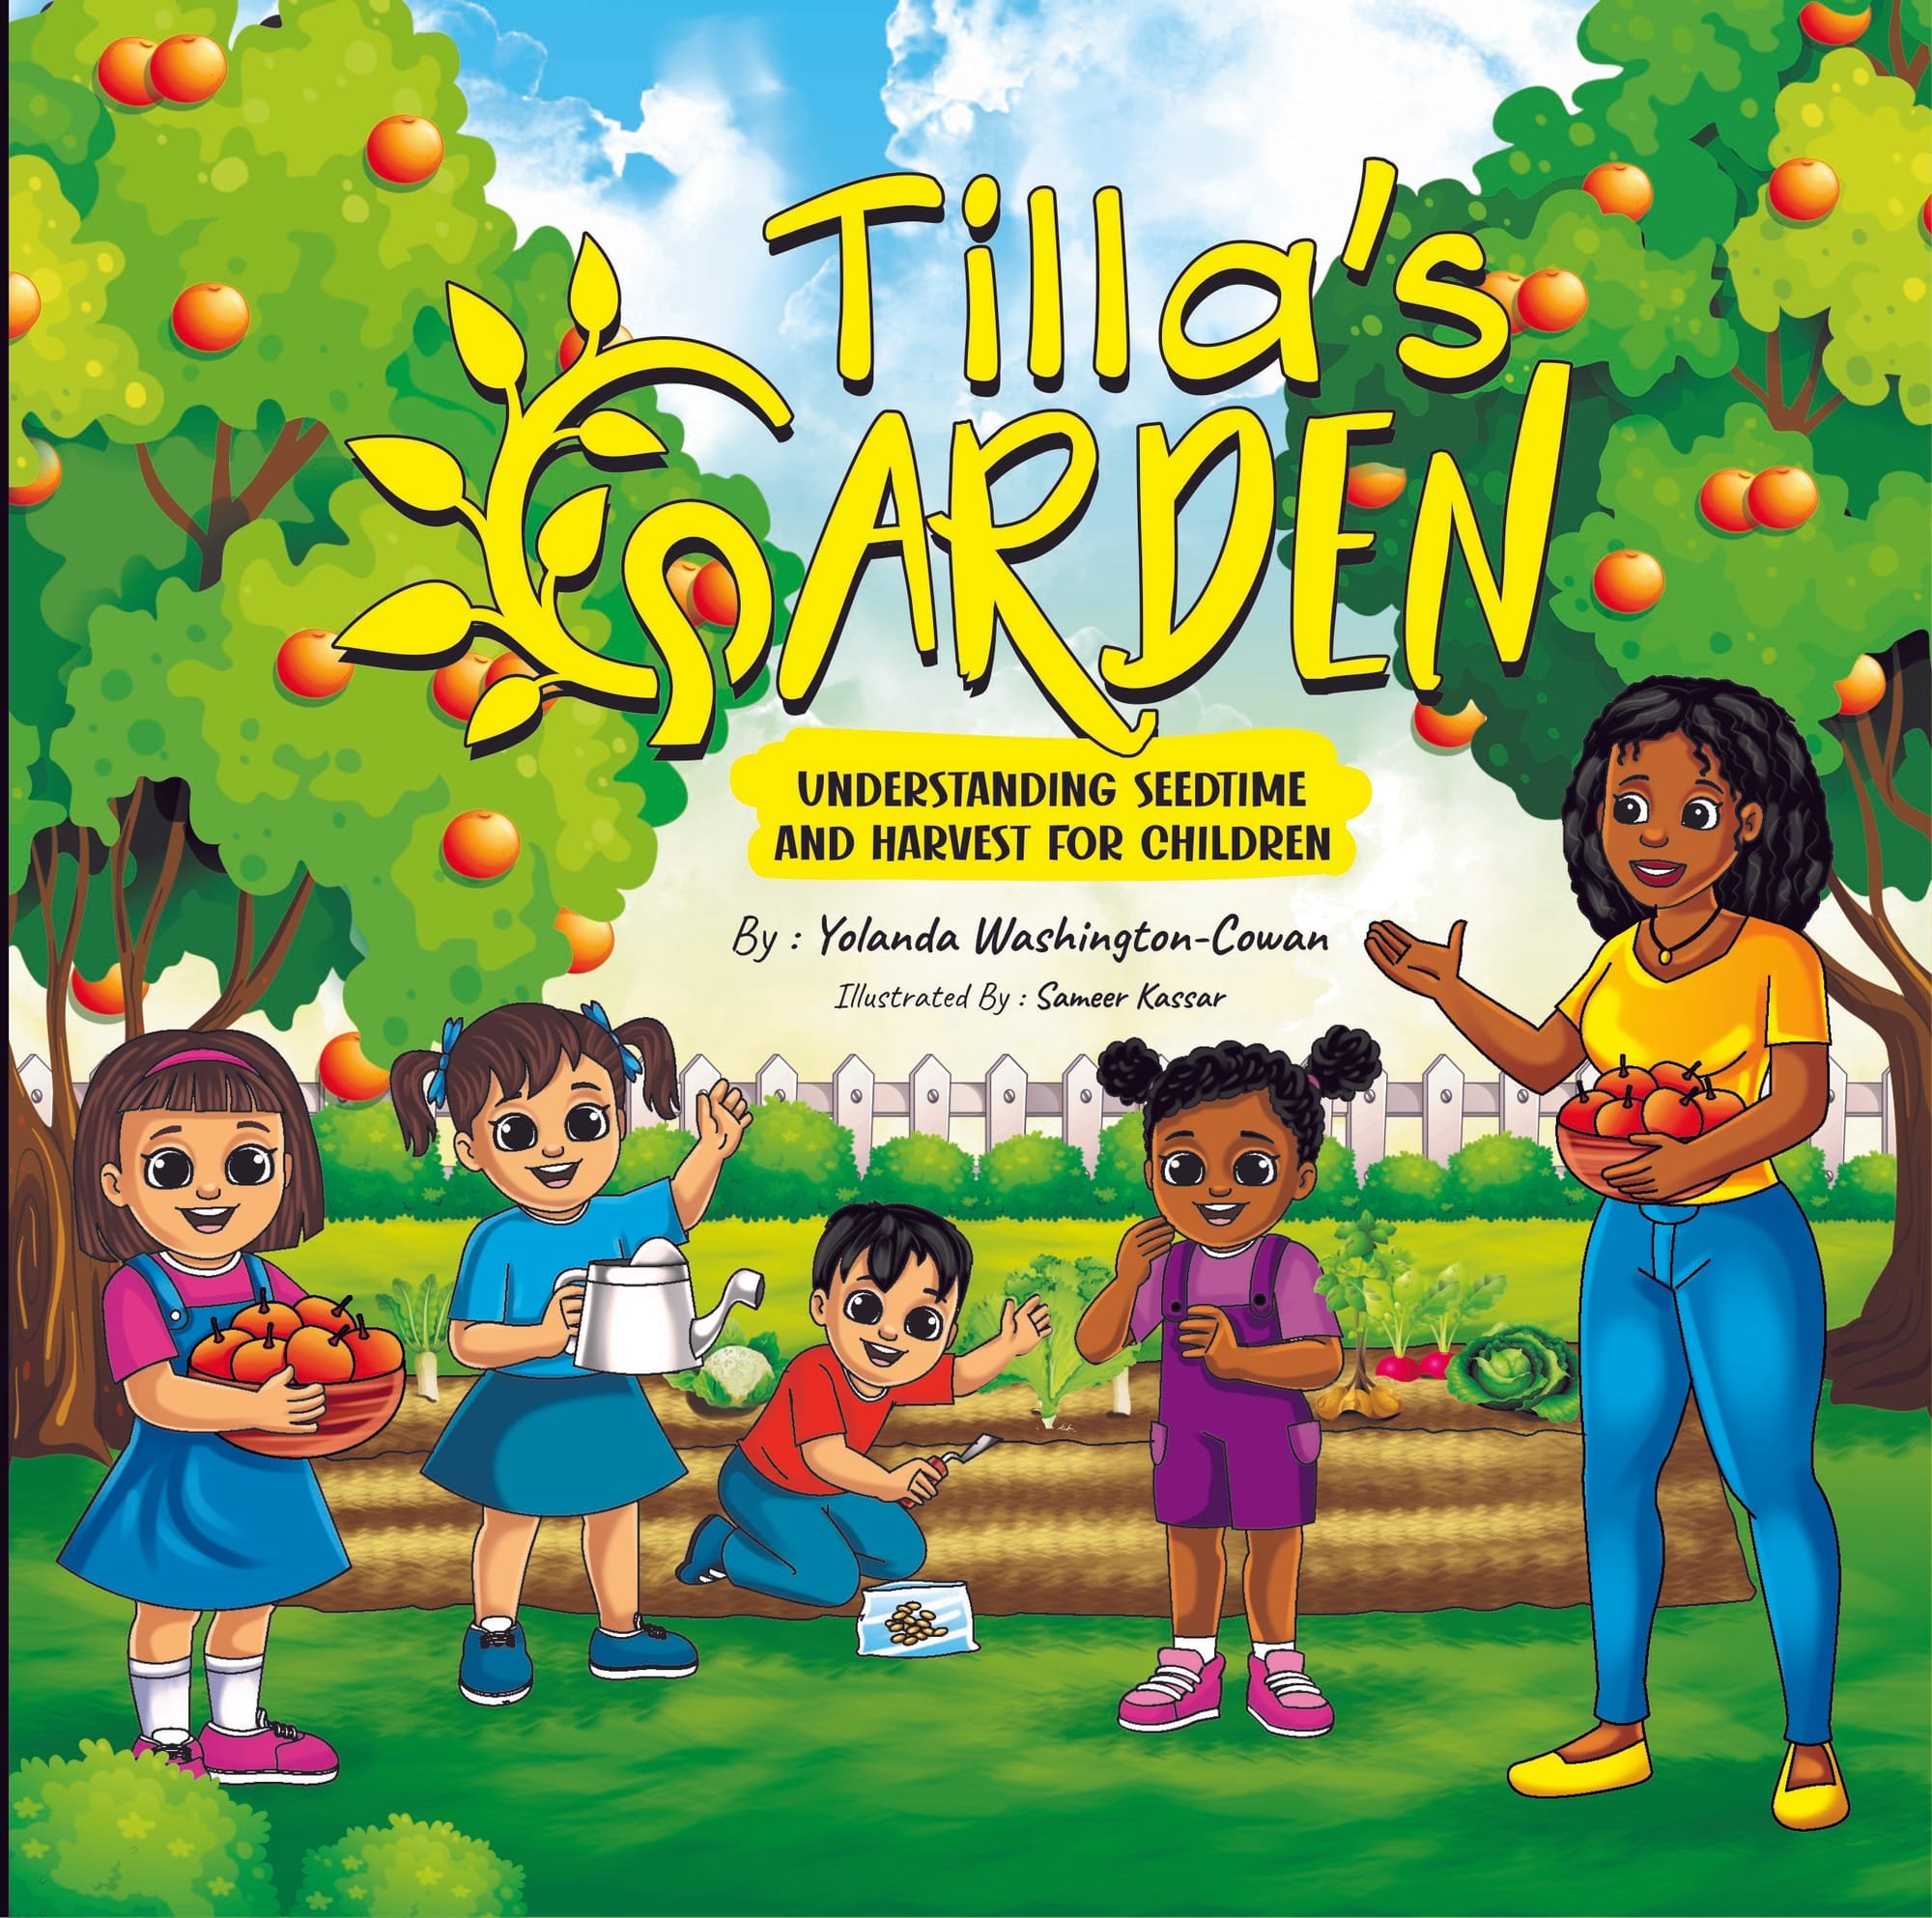 Tilla's Garden: Understanding Seedtime and Harvest for Children  Available in Ebook, Audible and Hard-copy